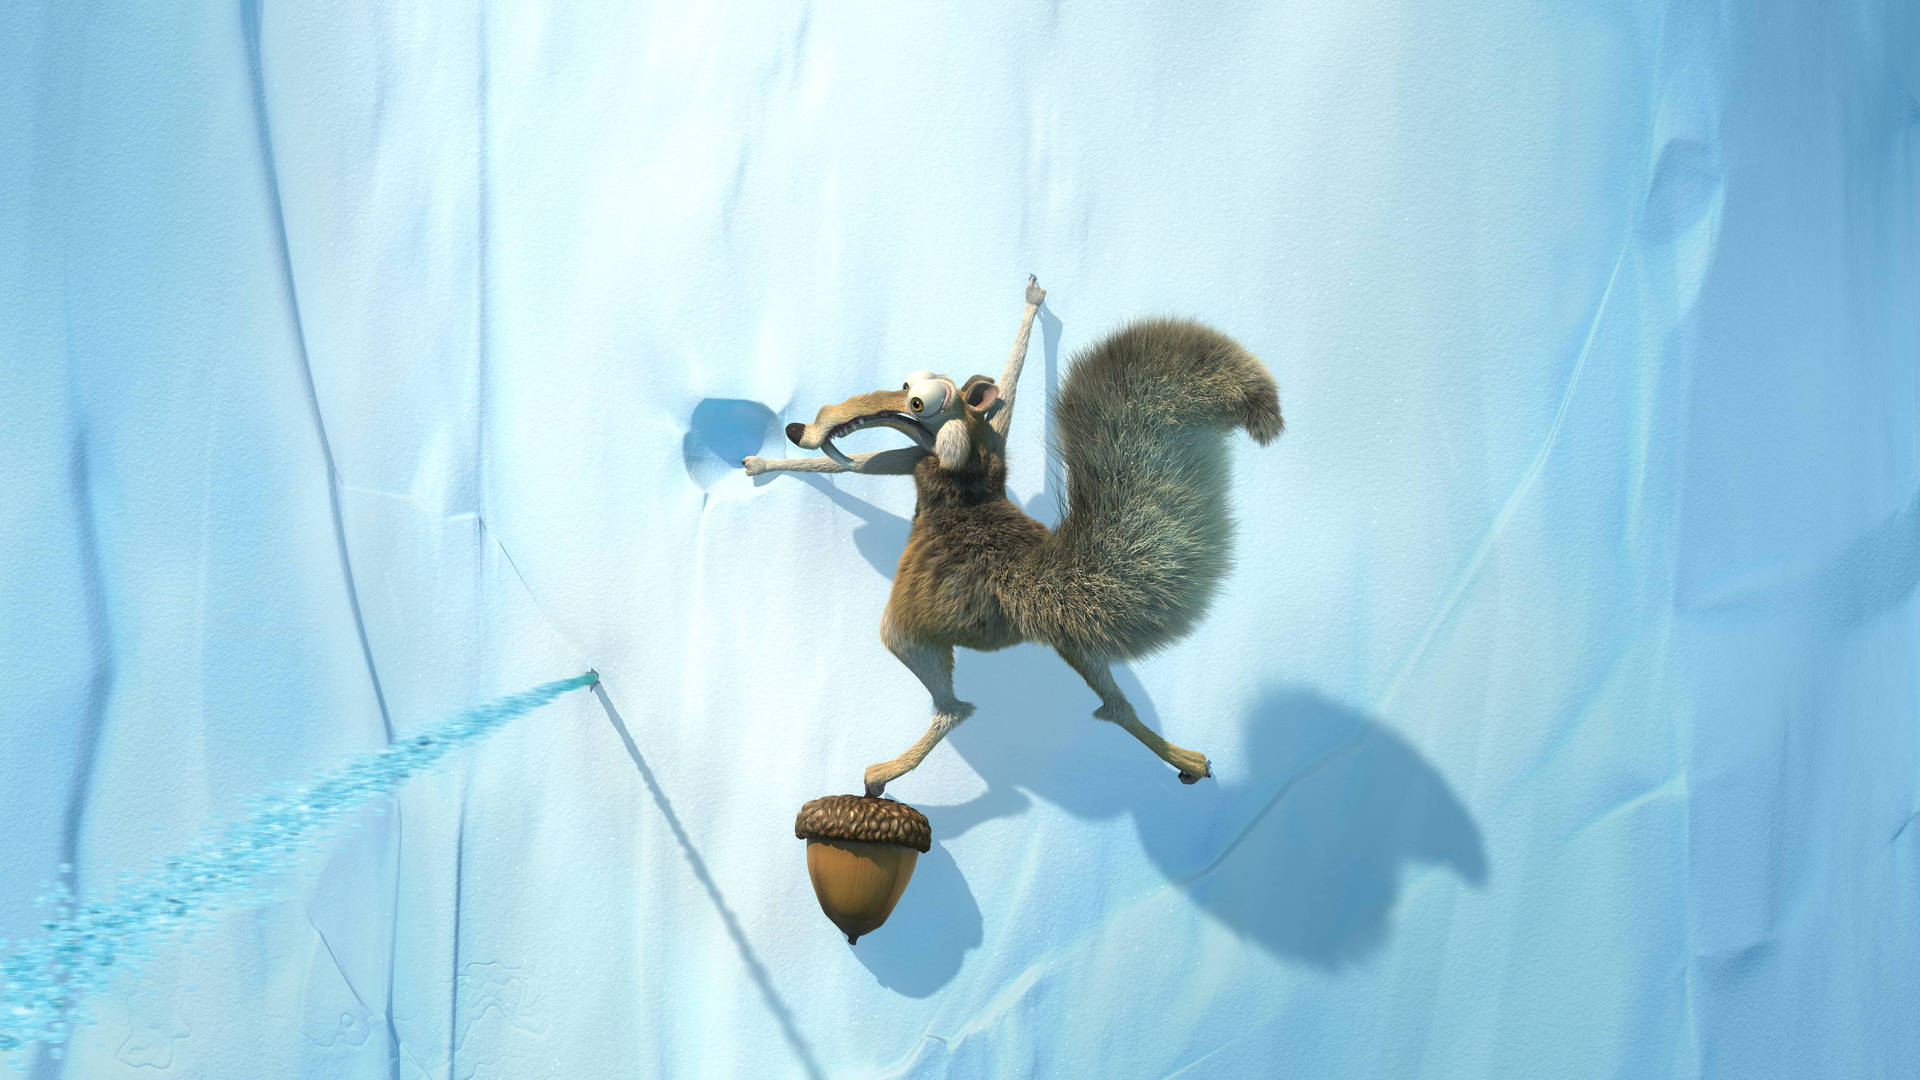 Scrat Scaling an Icy Wall in Ice Age Wallpaper